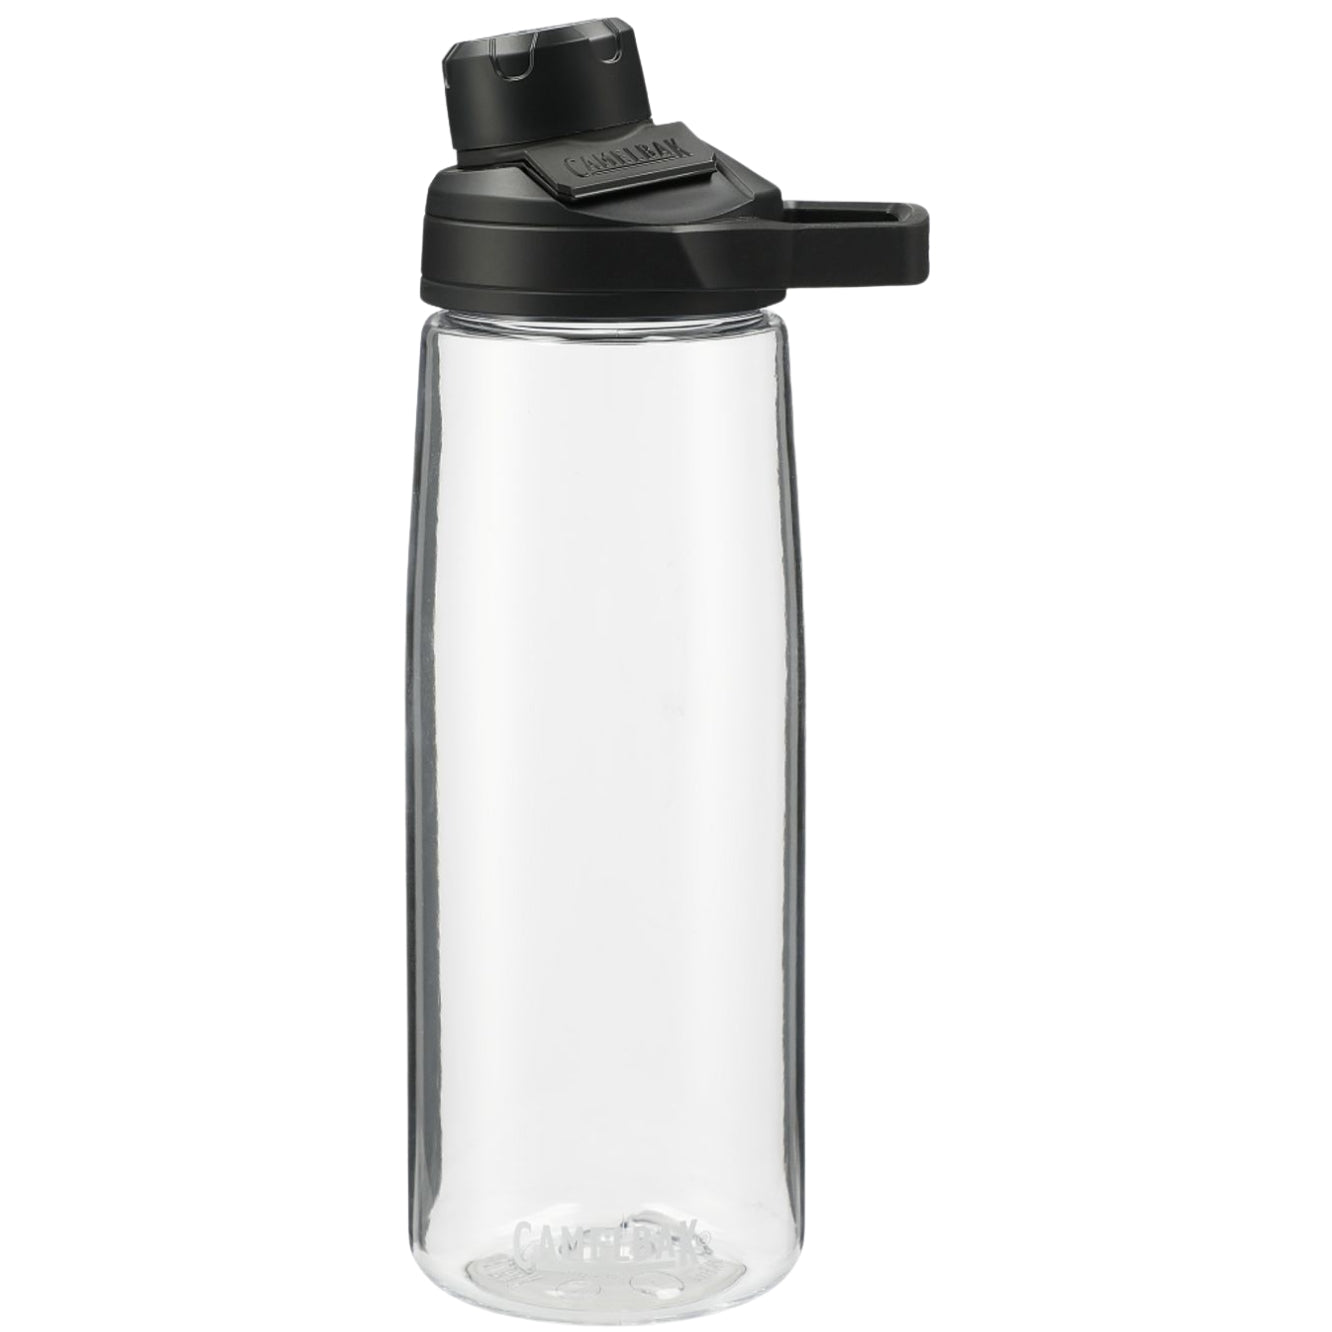 Customizable recycled plastic Camelbak Chute water bottle in clear